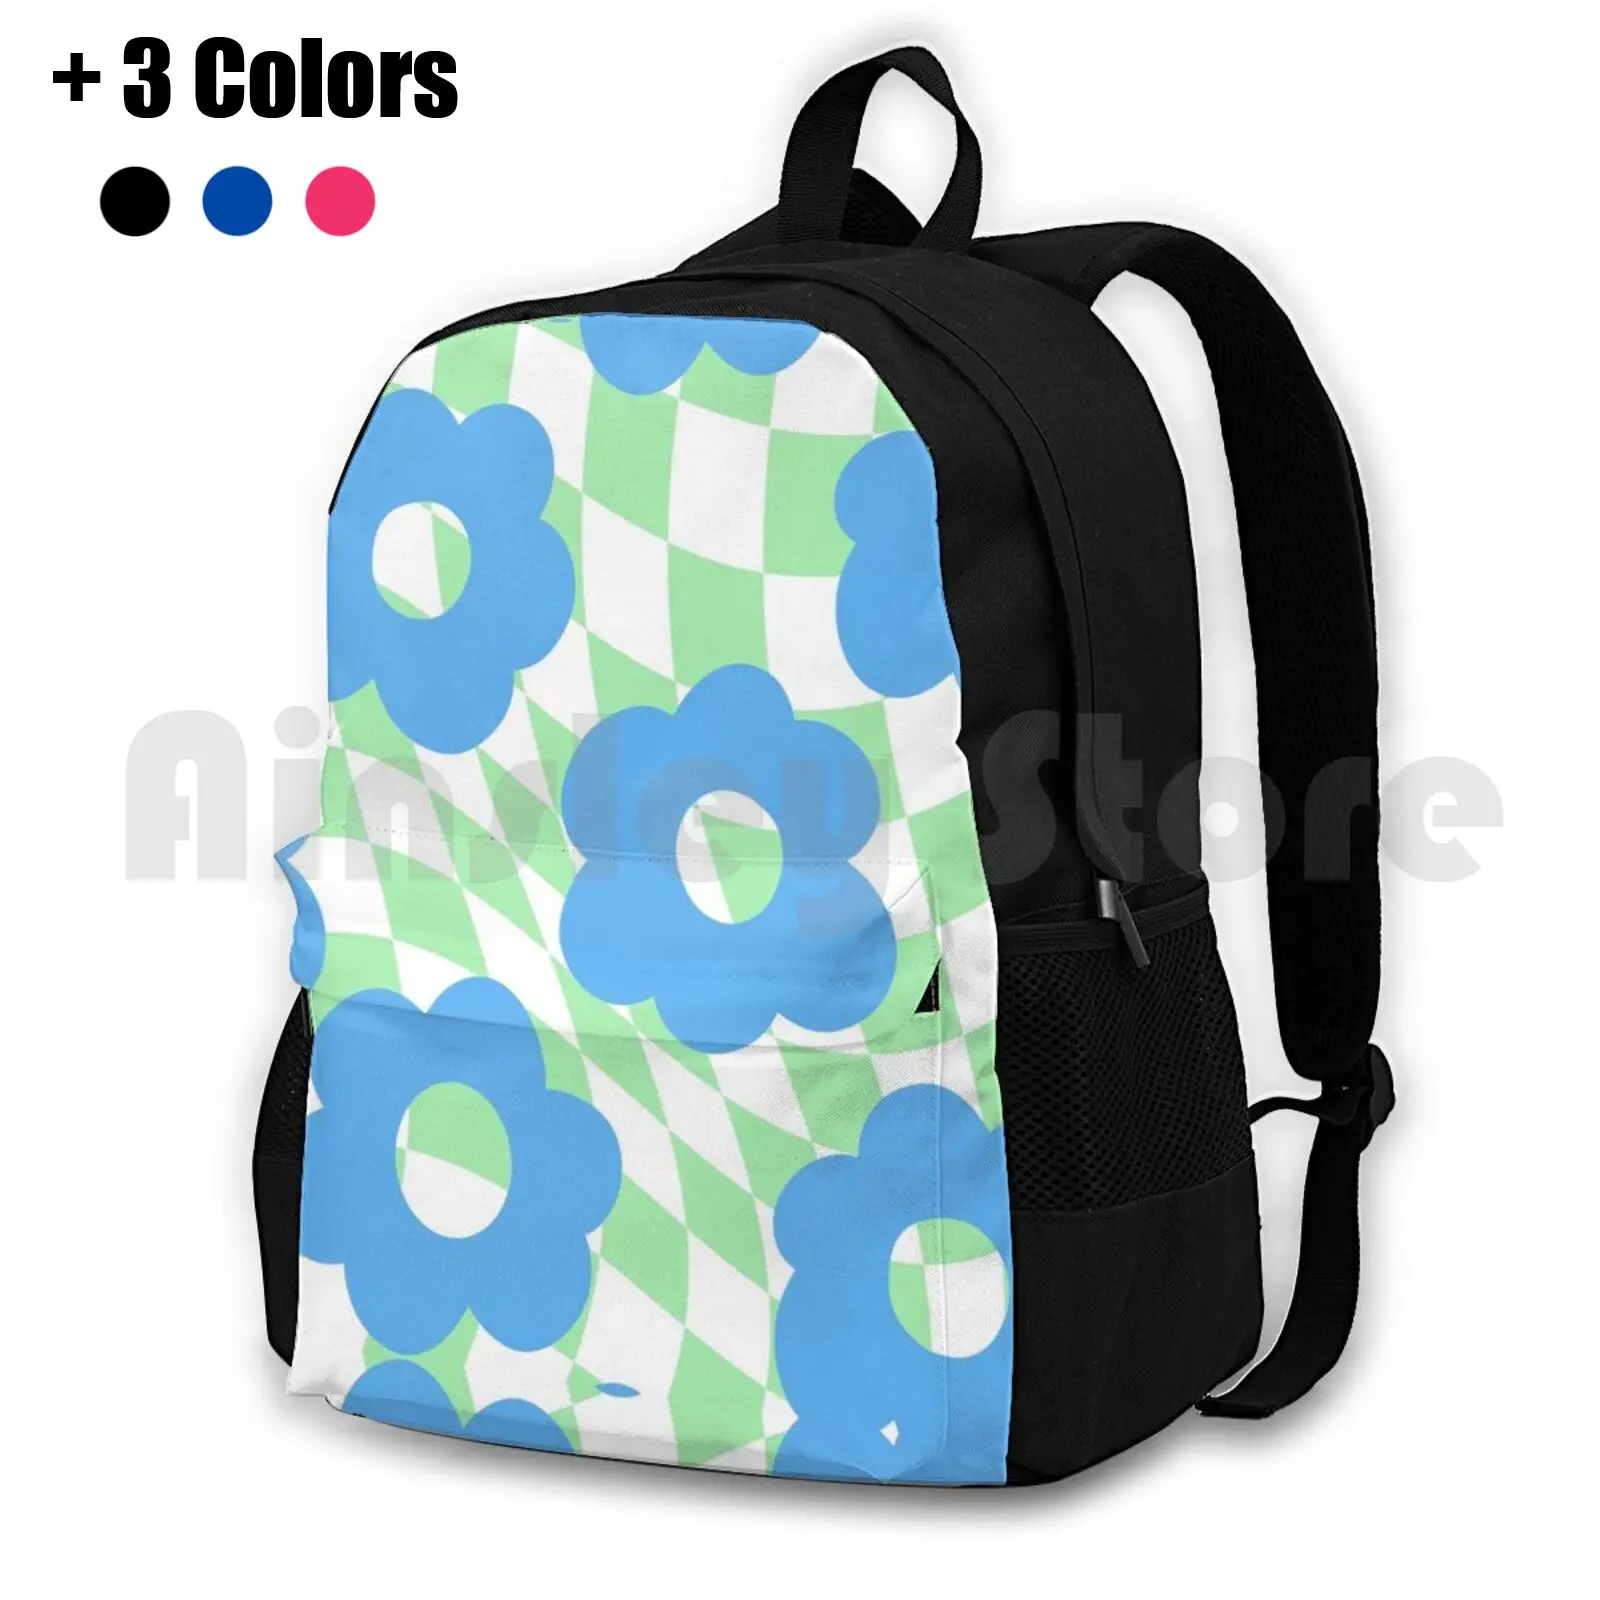 

Checkered Floral Outdoor Hiking Backpack Riding Climbing Sports Bag Checker Check Twist Liquid Flower Floral Flowers Pattern